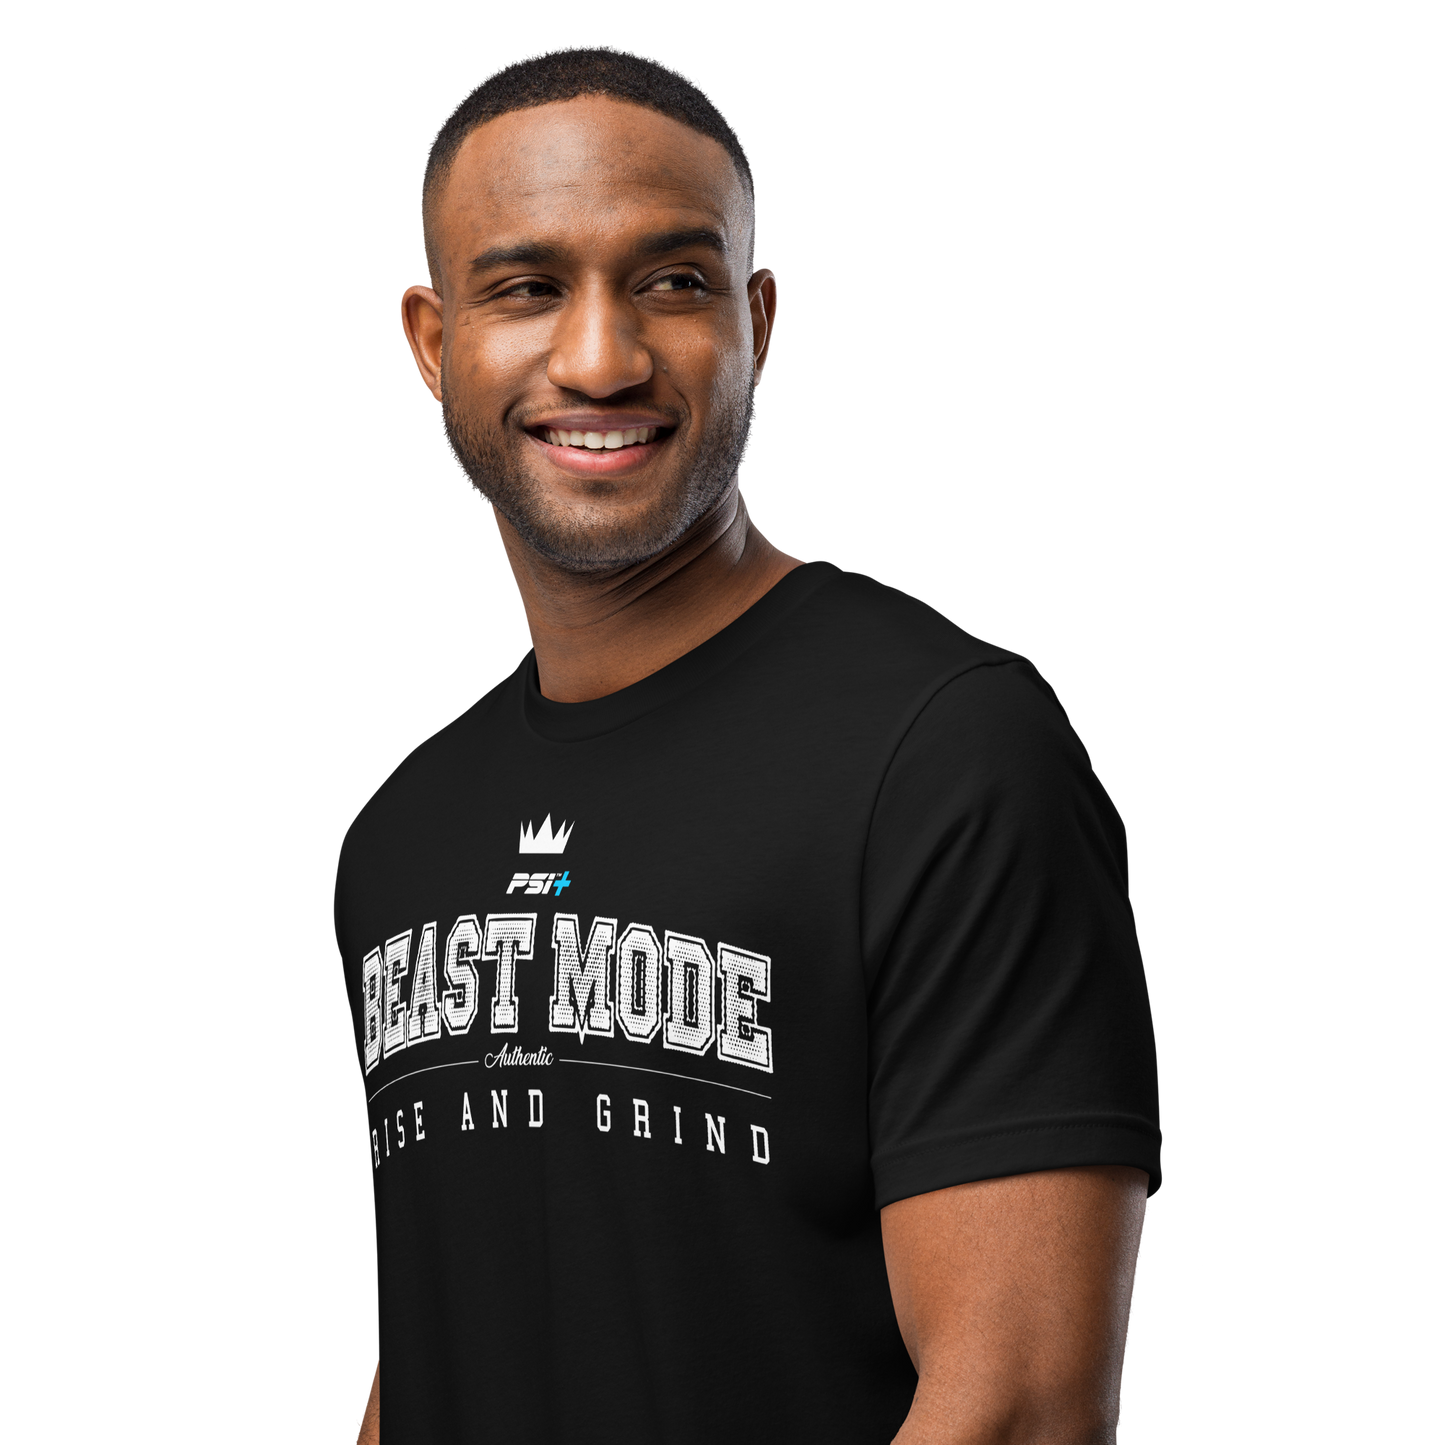 PSI Beast Mode Rise and Grind (Black)